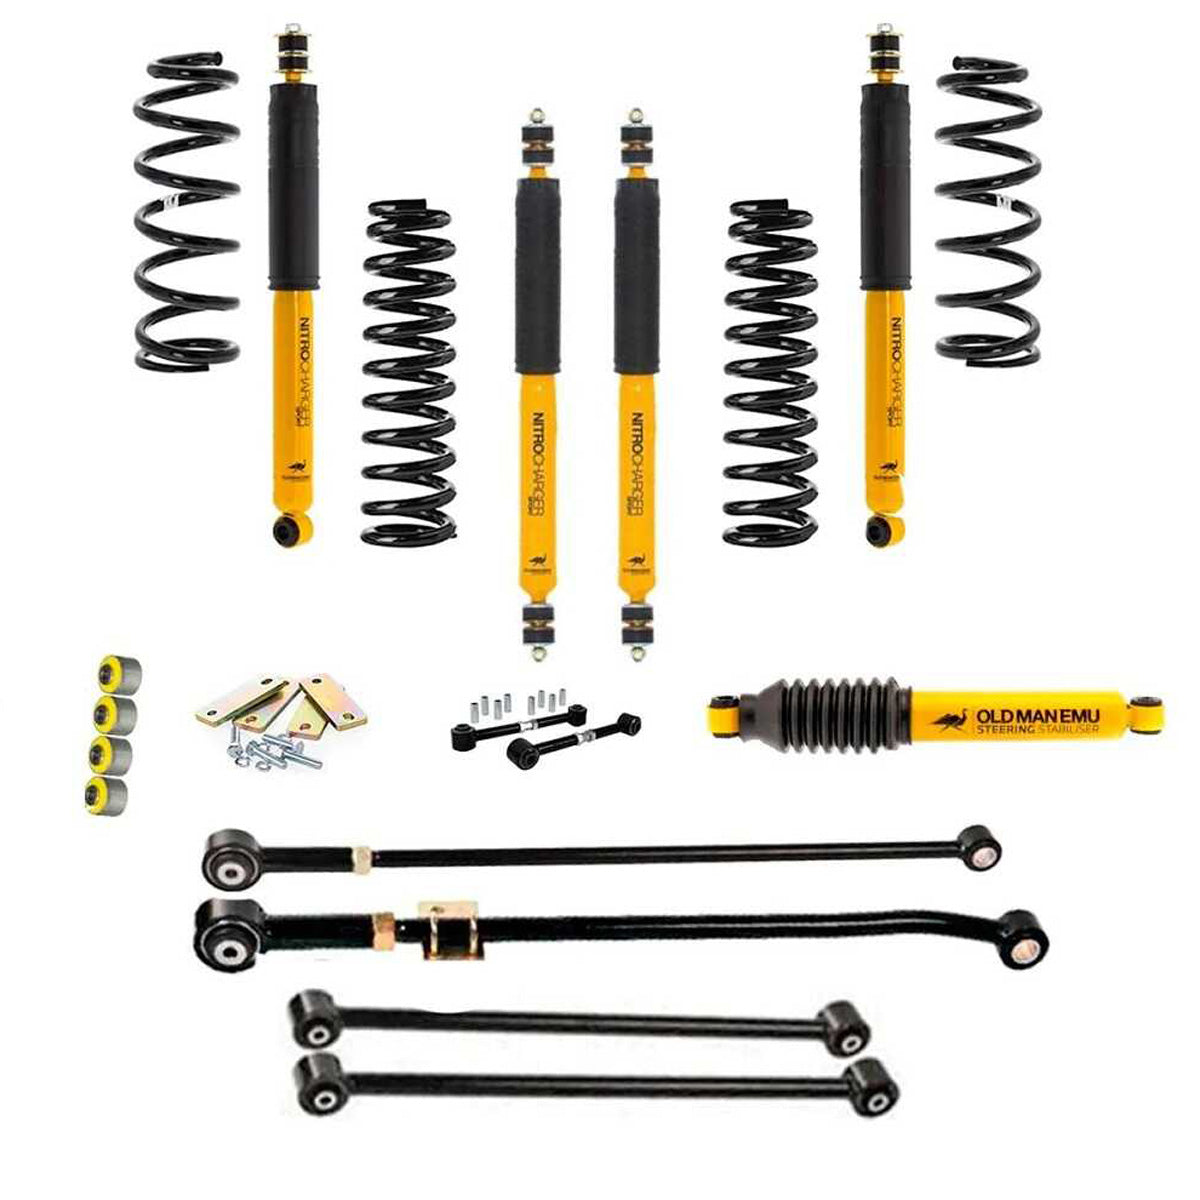 Upgrade your Jeep Wrangler's suspension with the OME 4 inch Lift Kit for LandCruiser 80 & 105 Series (90-07) from Old Man Emu for improved ground clearance and enhanced suspension articulation.